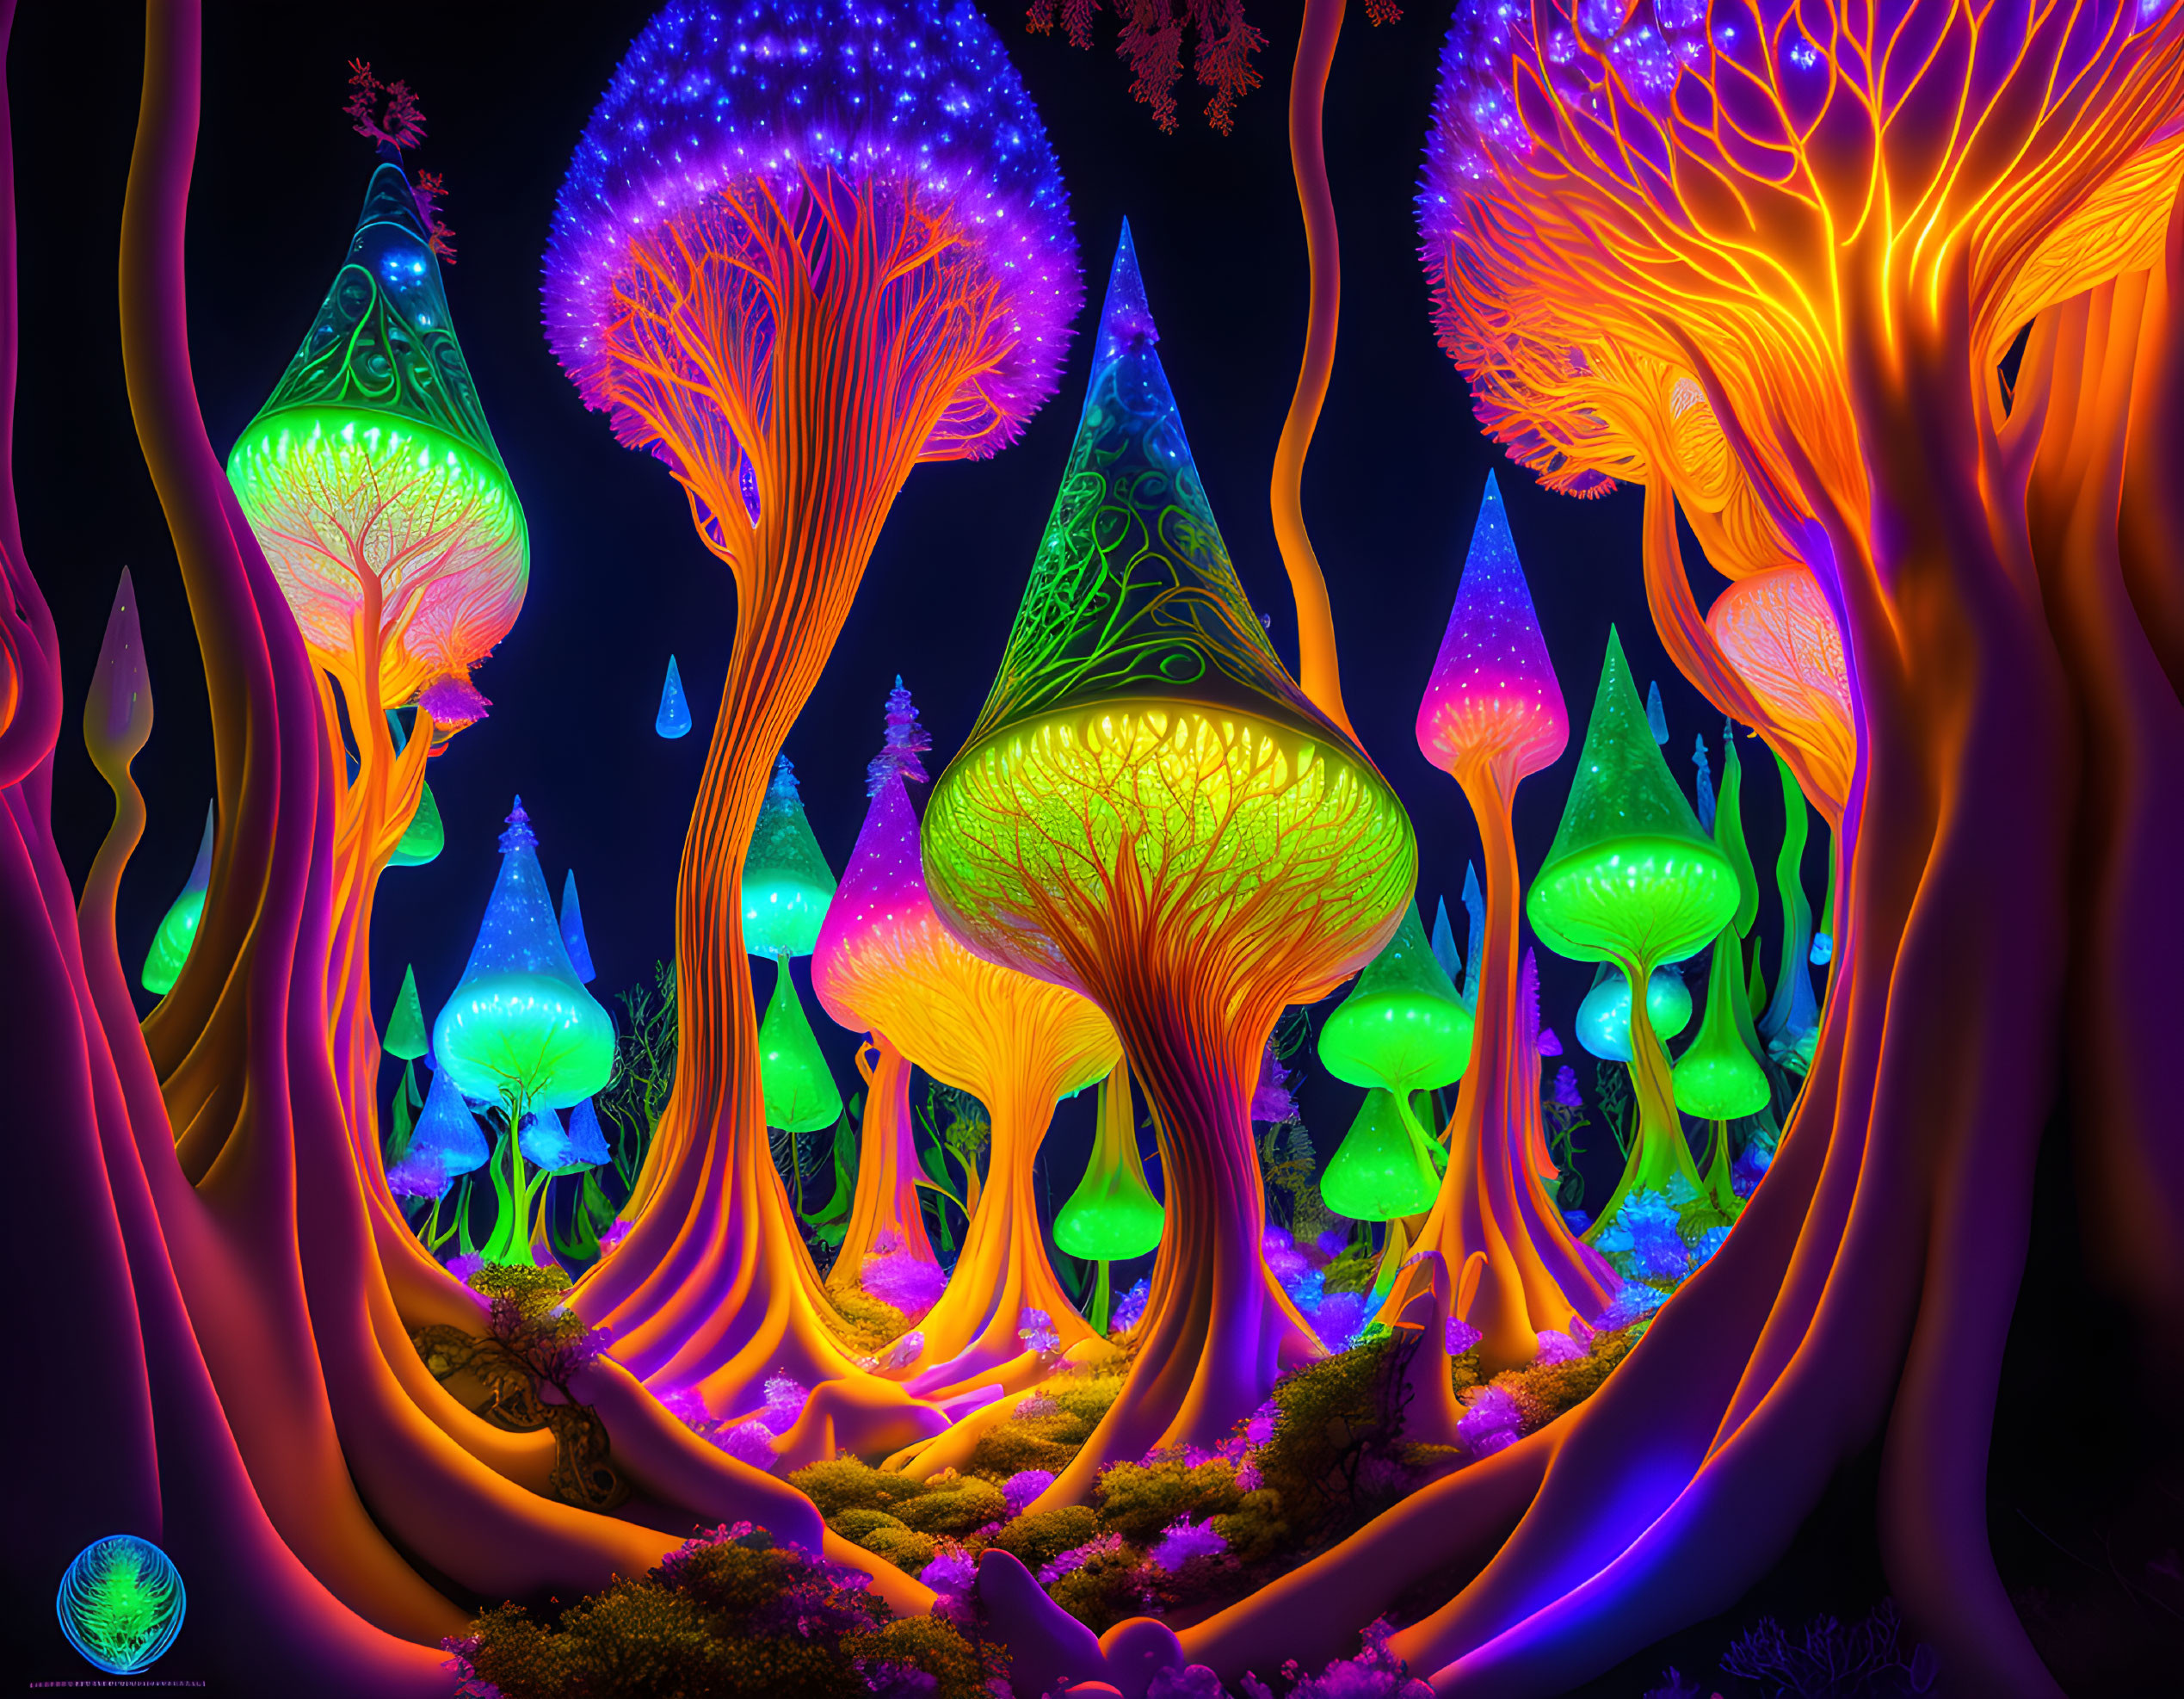 Fantasy forest with neon colors and luminous plants